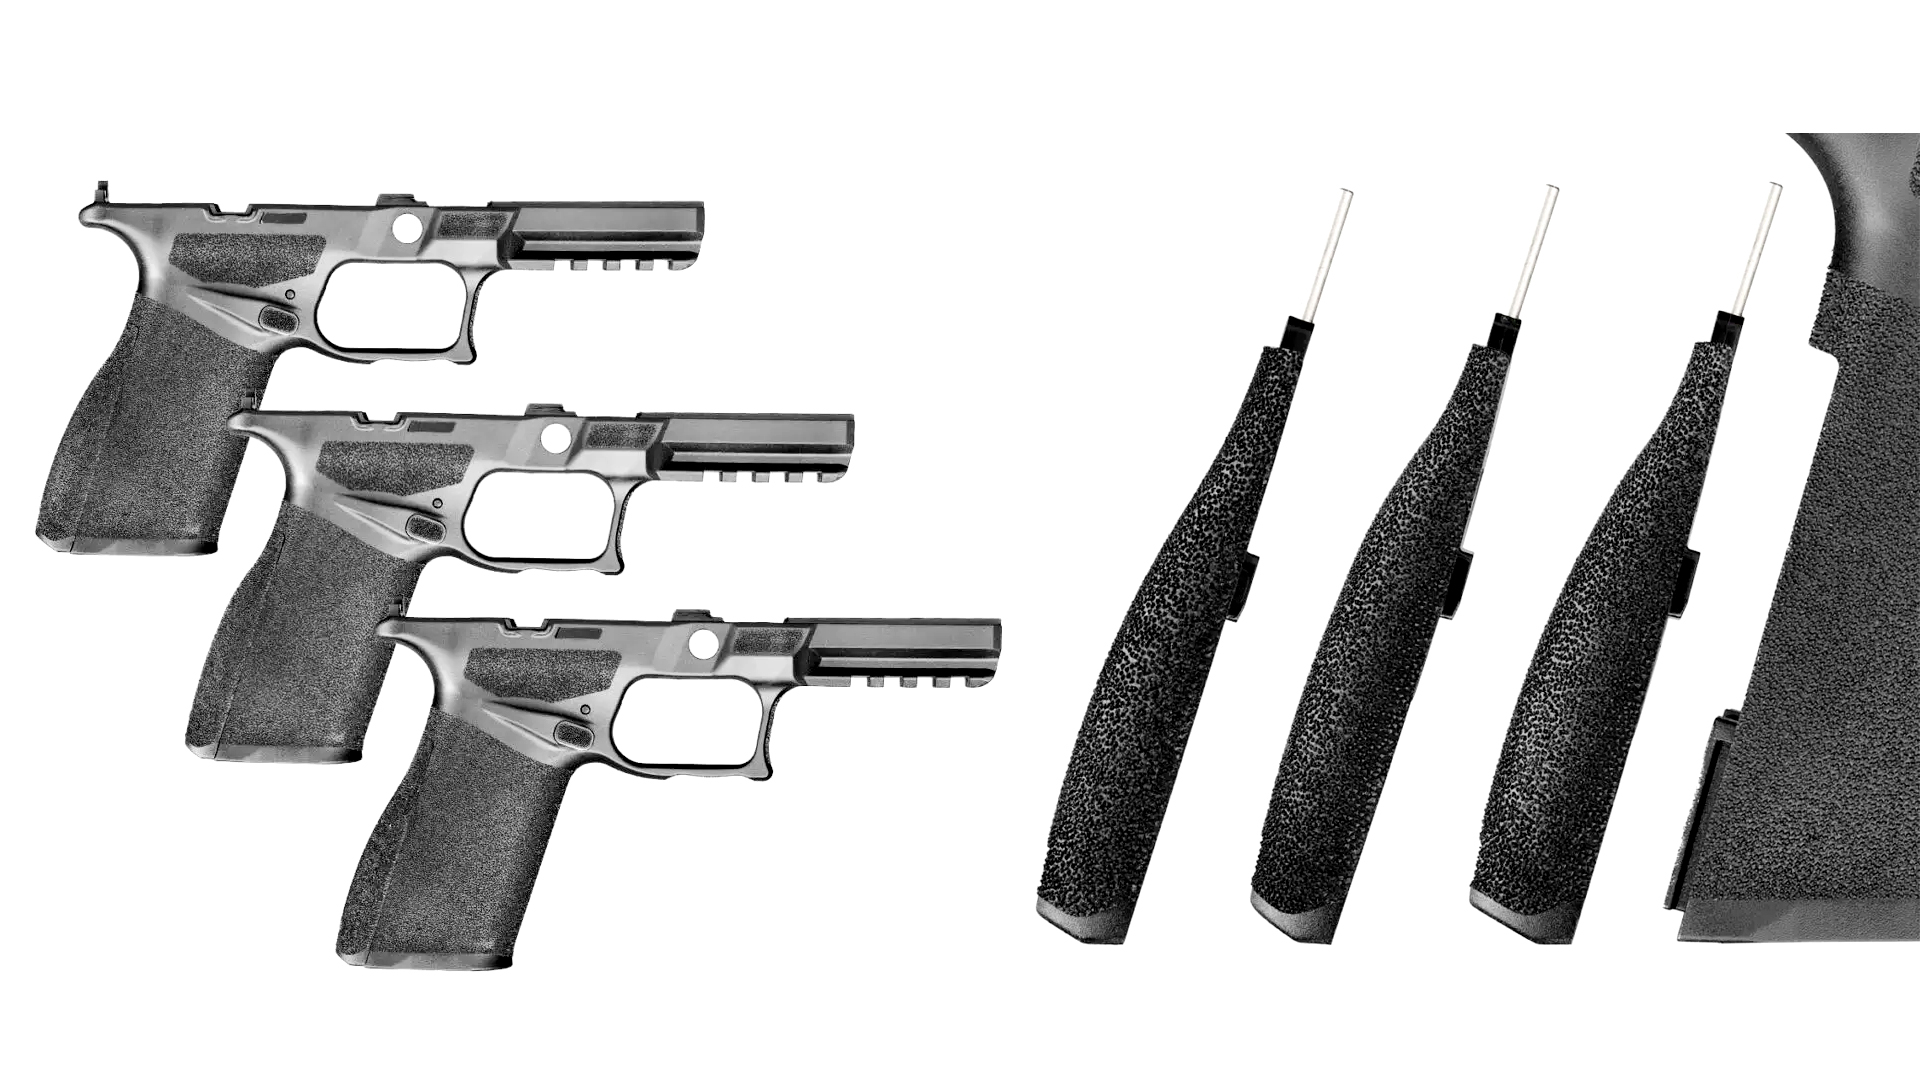 Different size interchangeable backstraps designed for the Springfield Armory Echelon.